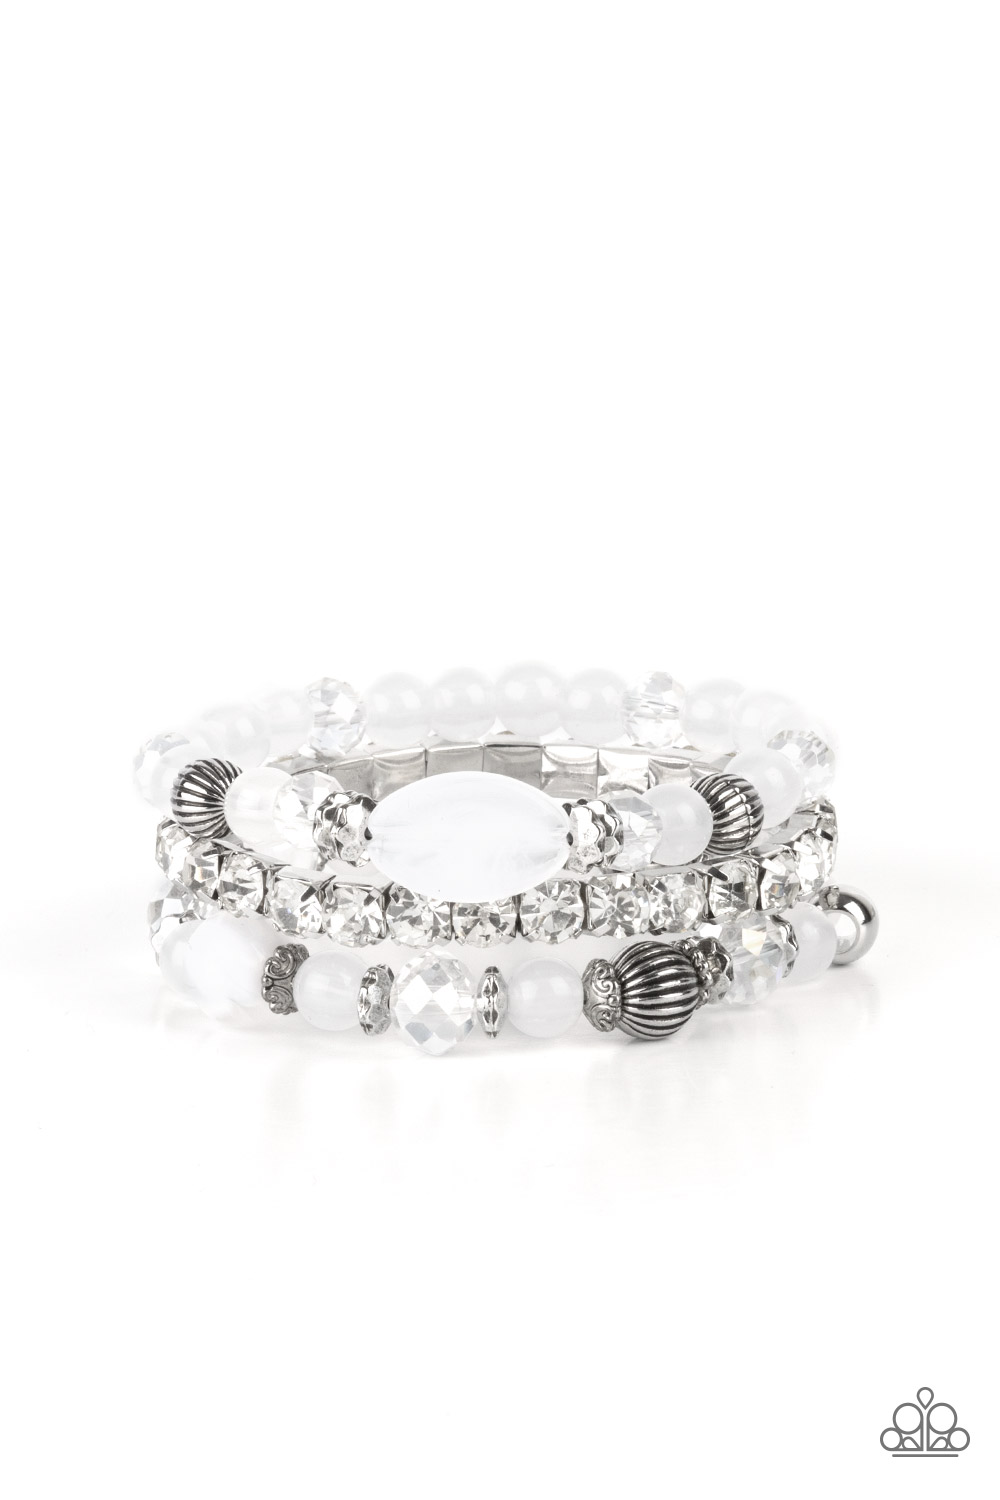 Paparazzi Accessories: Ethereal Etiquette - White | Paparazzi Accessories